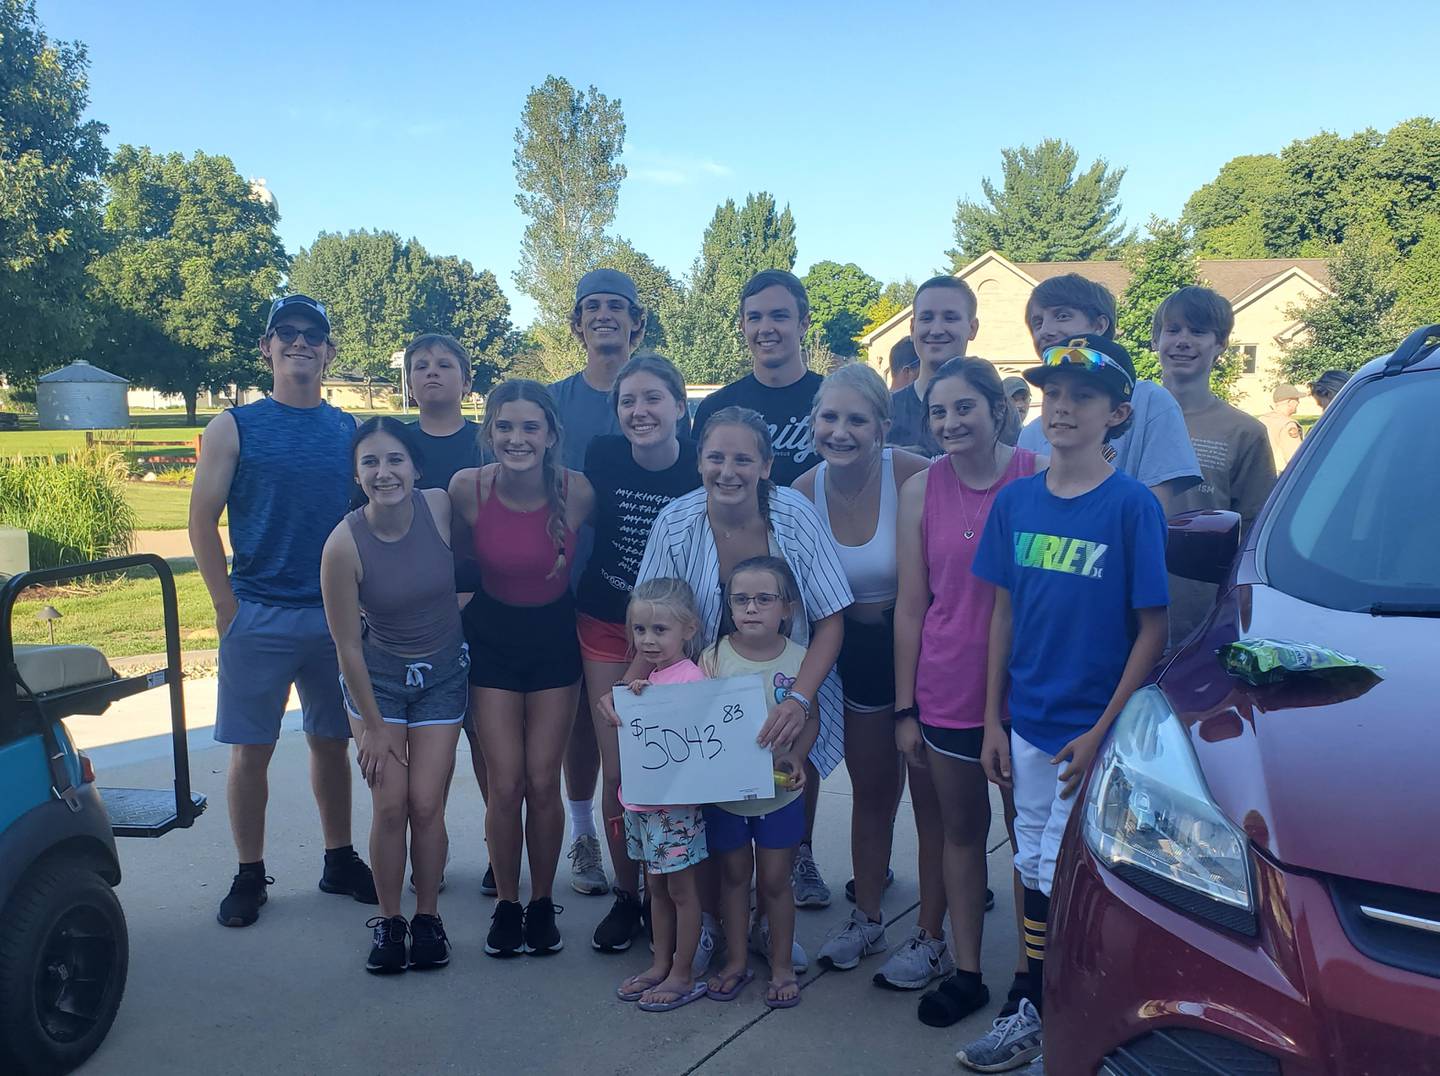 With the added support, the group looked to raise $5,000 for the American Foundation for Suicide Prevention; a goal that just minutes before departing for the final mile Ciucci was informed they were able to surpass.